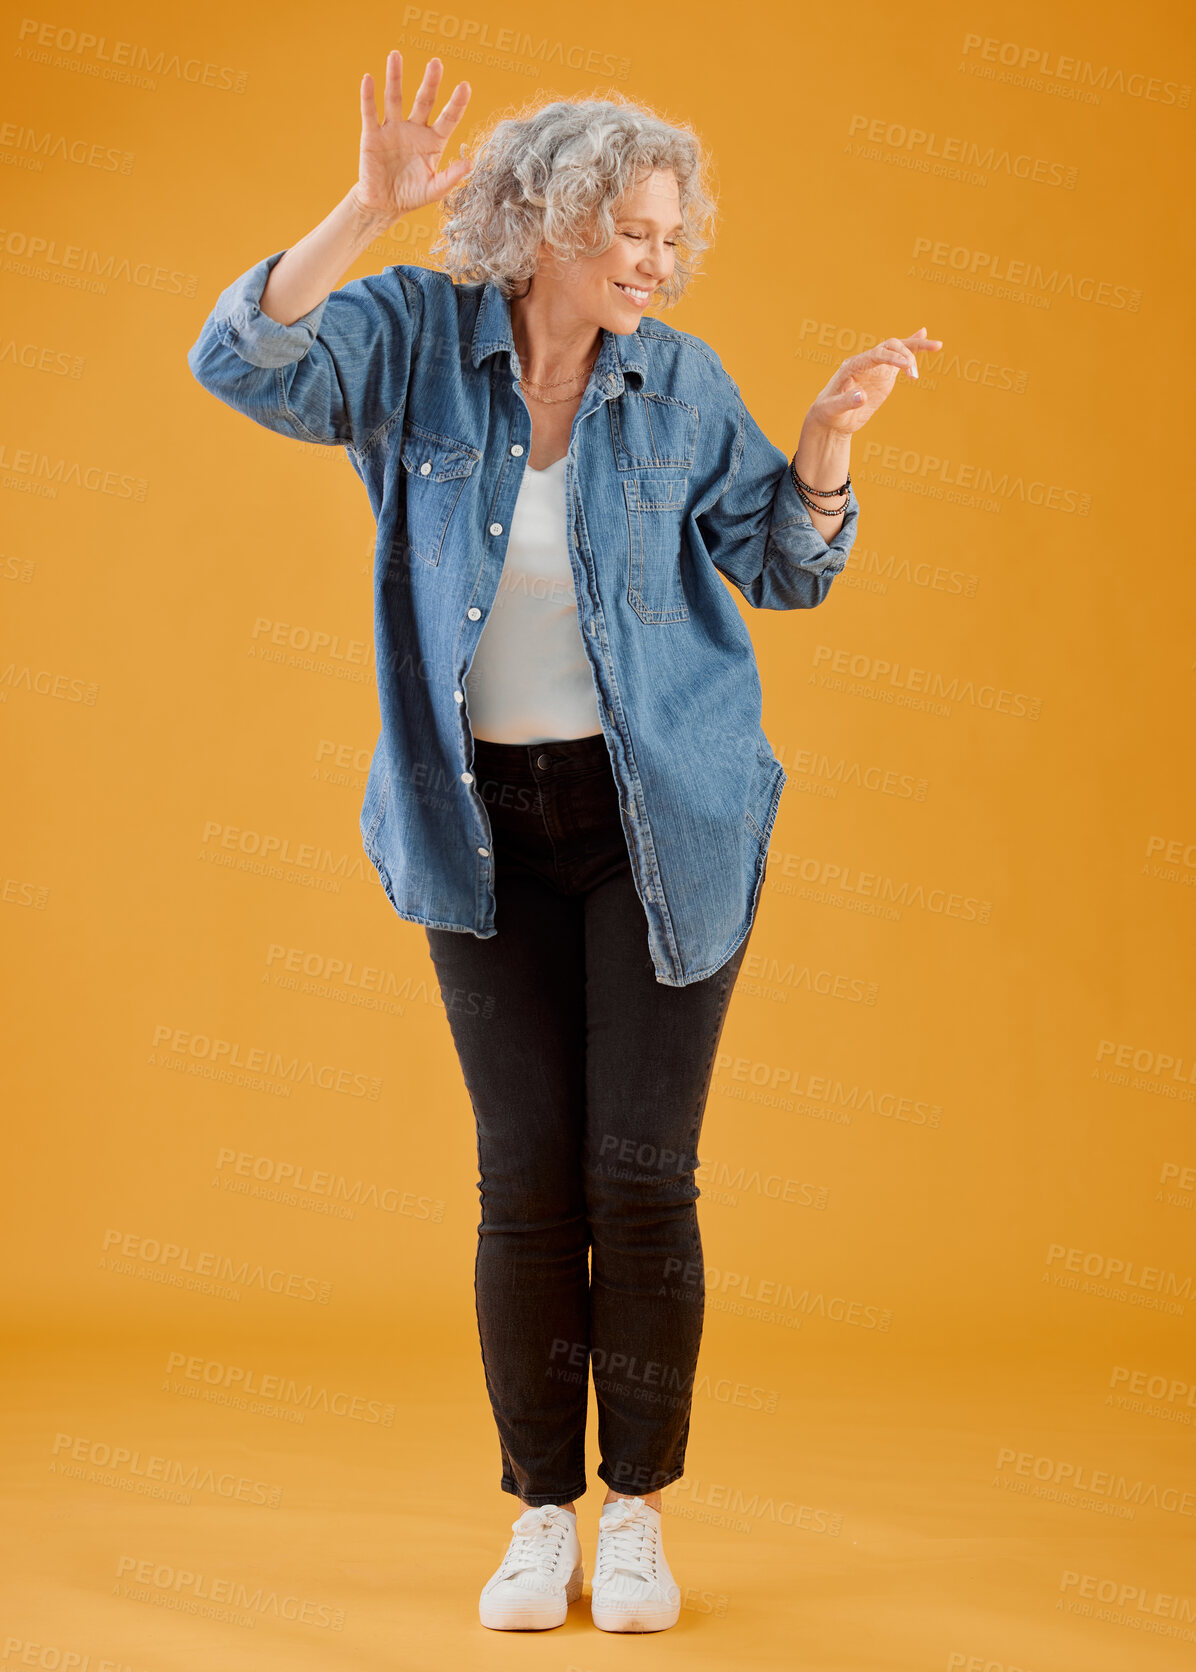 Buy stock photo Fun, happy and cheerful woman dancing, celebrating and enjoying life alone against an orange background. Senior woman feeling excited, joyful and playful with dressed stylish, trendy and fashionable